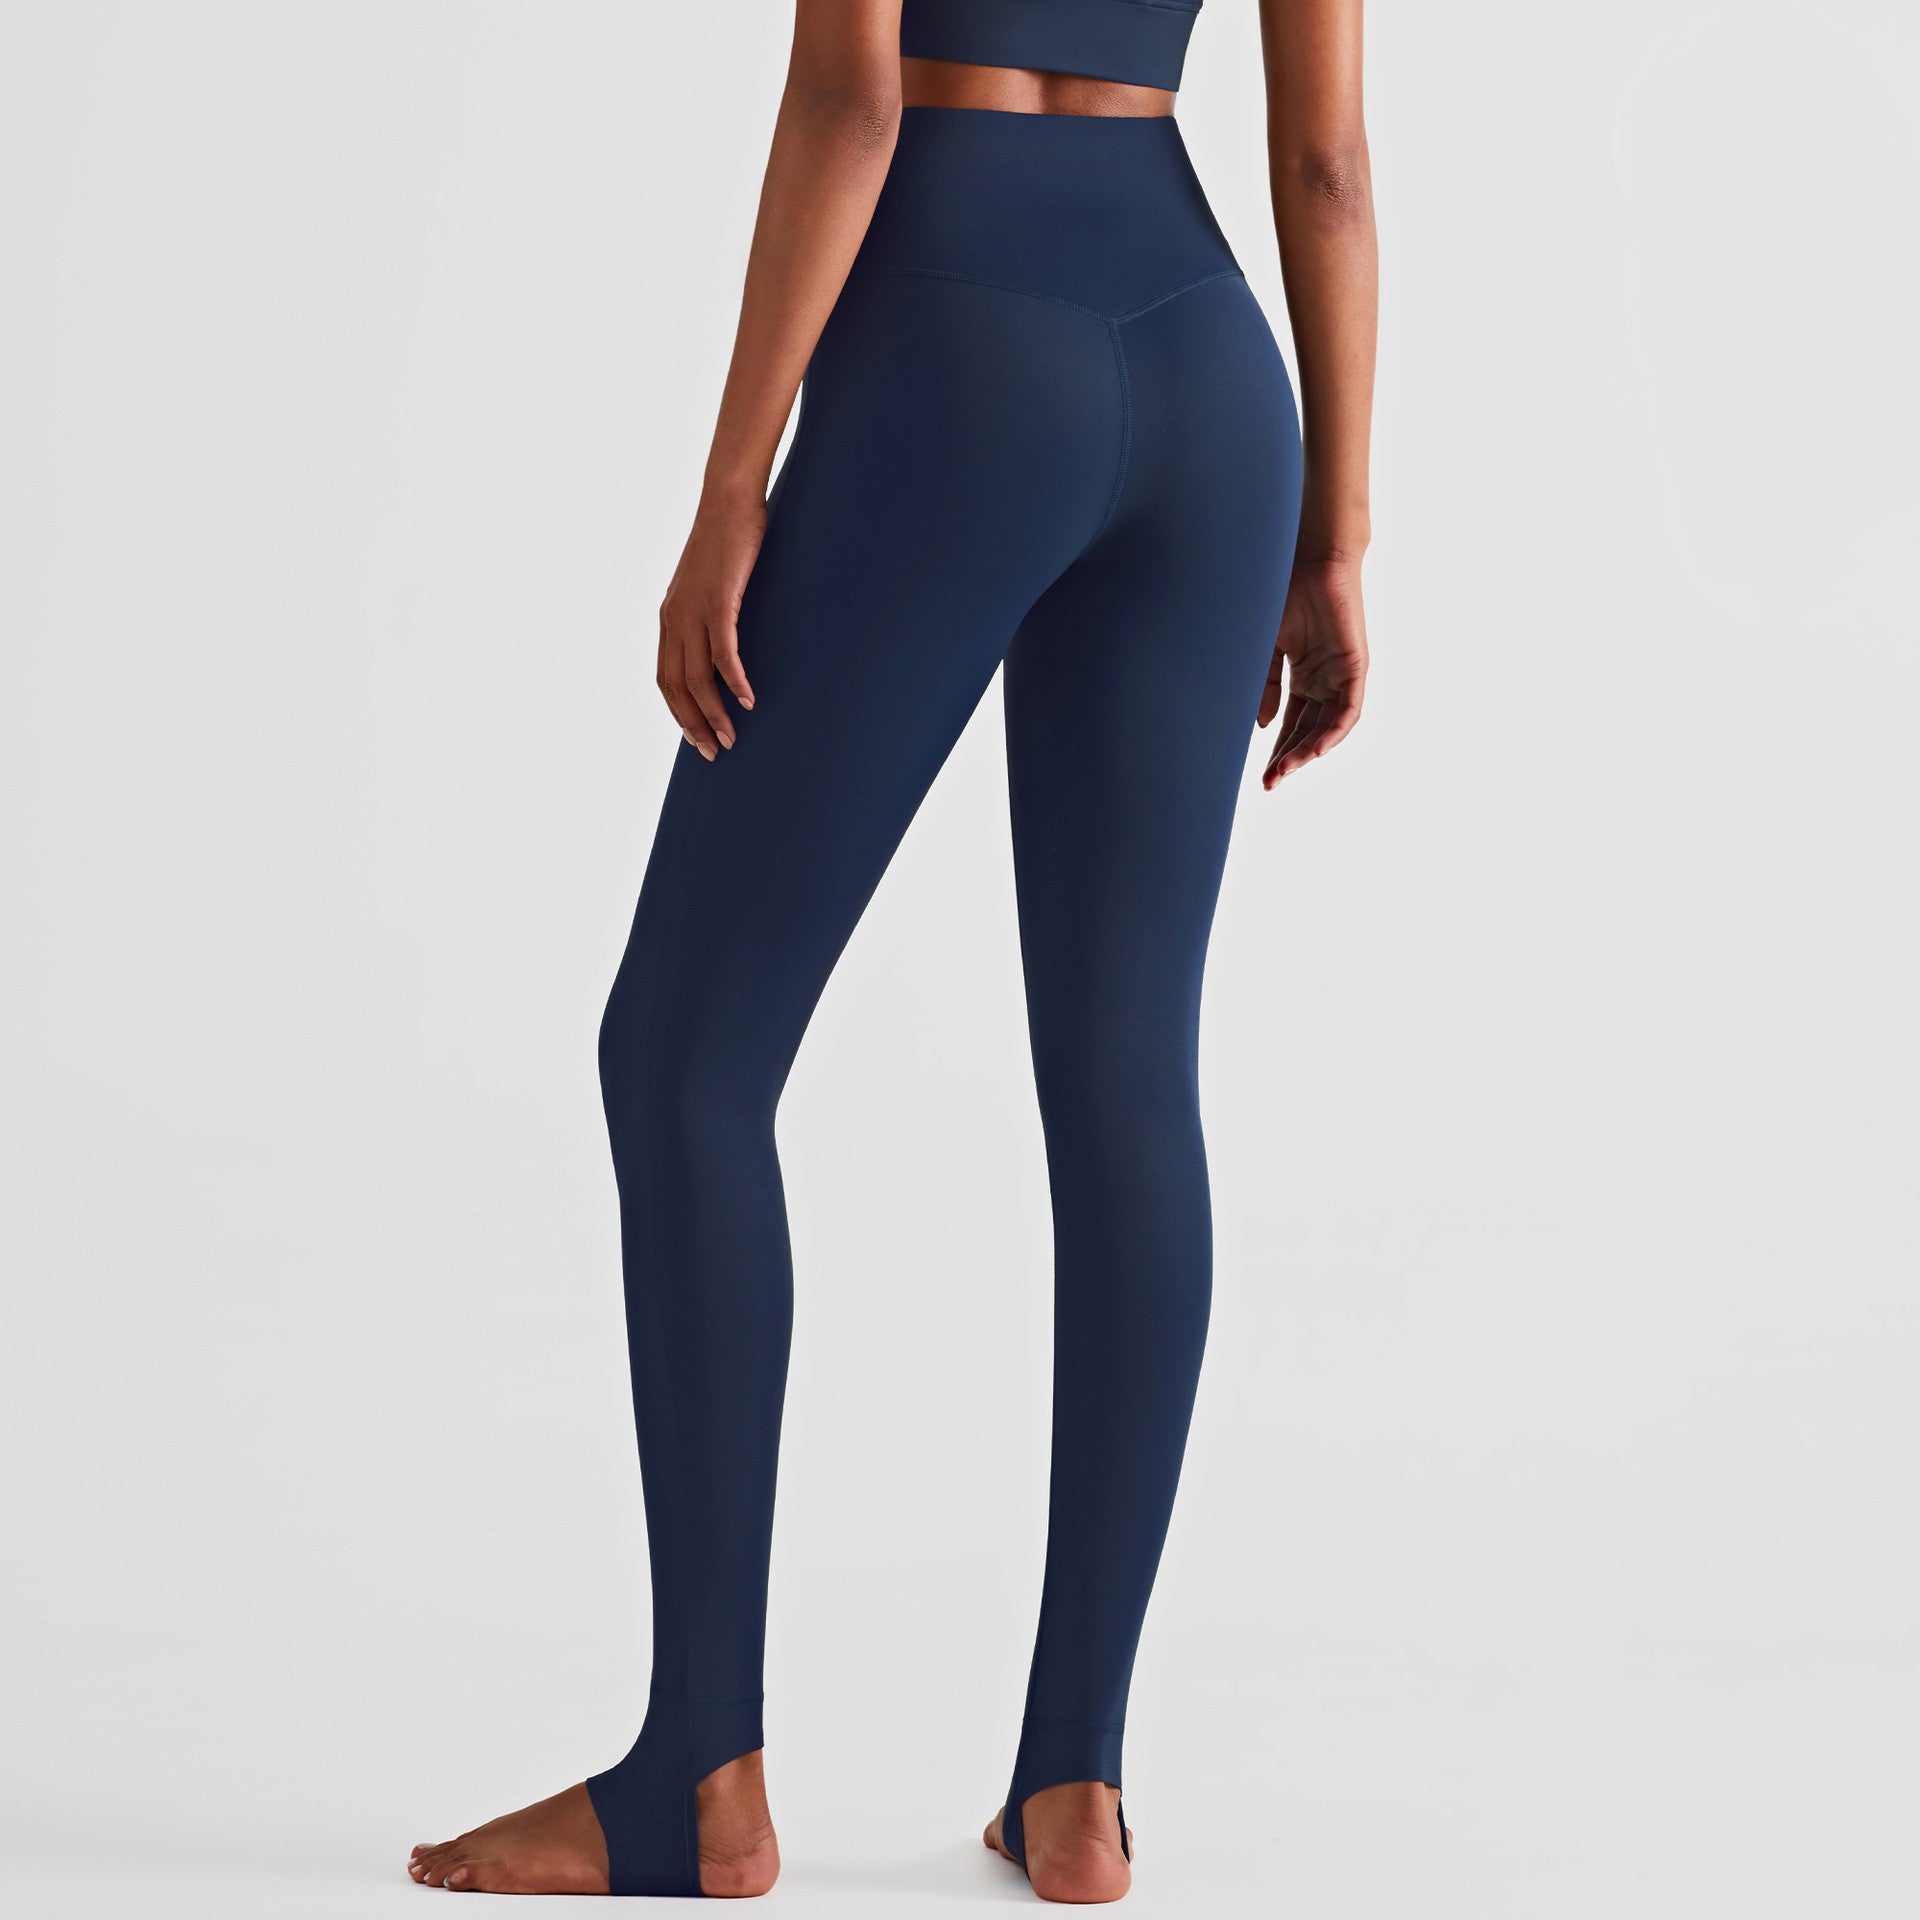 high-waisted-butt-lifting-fitness-step-pants-tight-fit